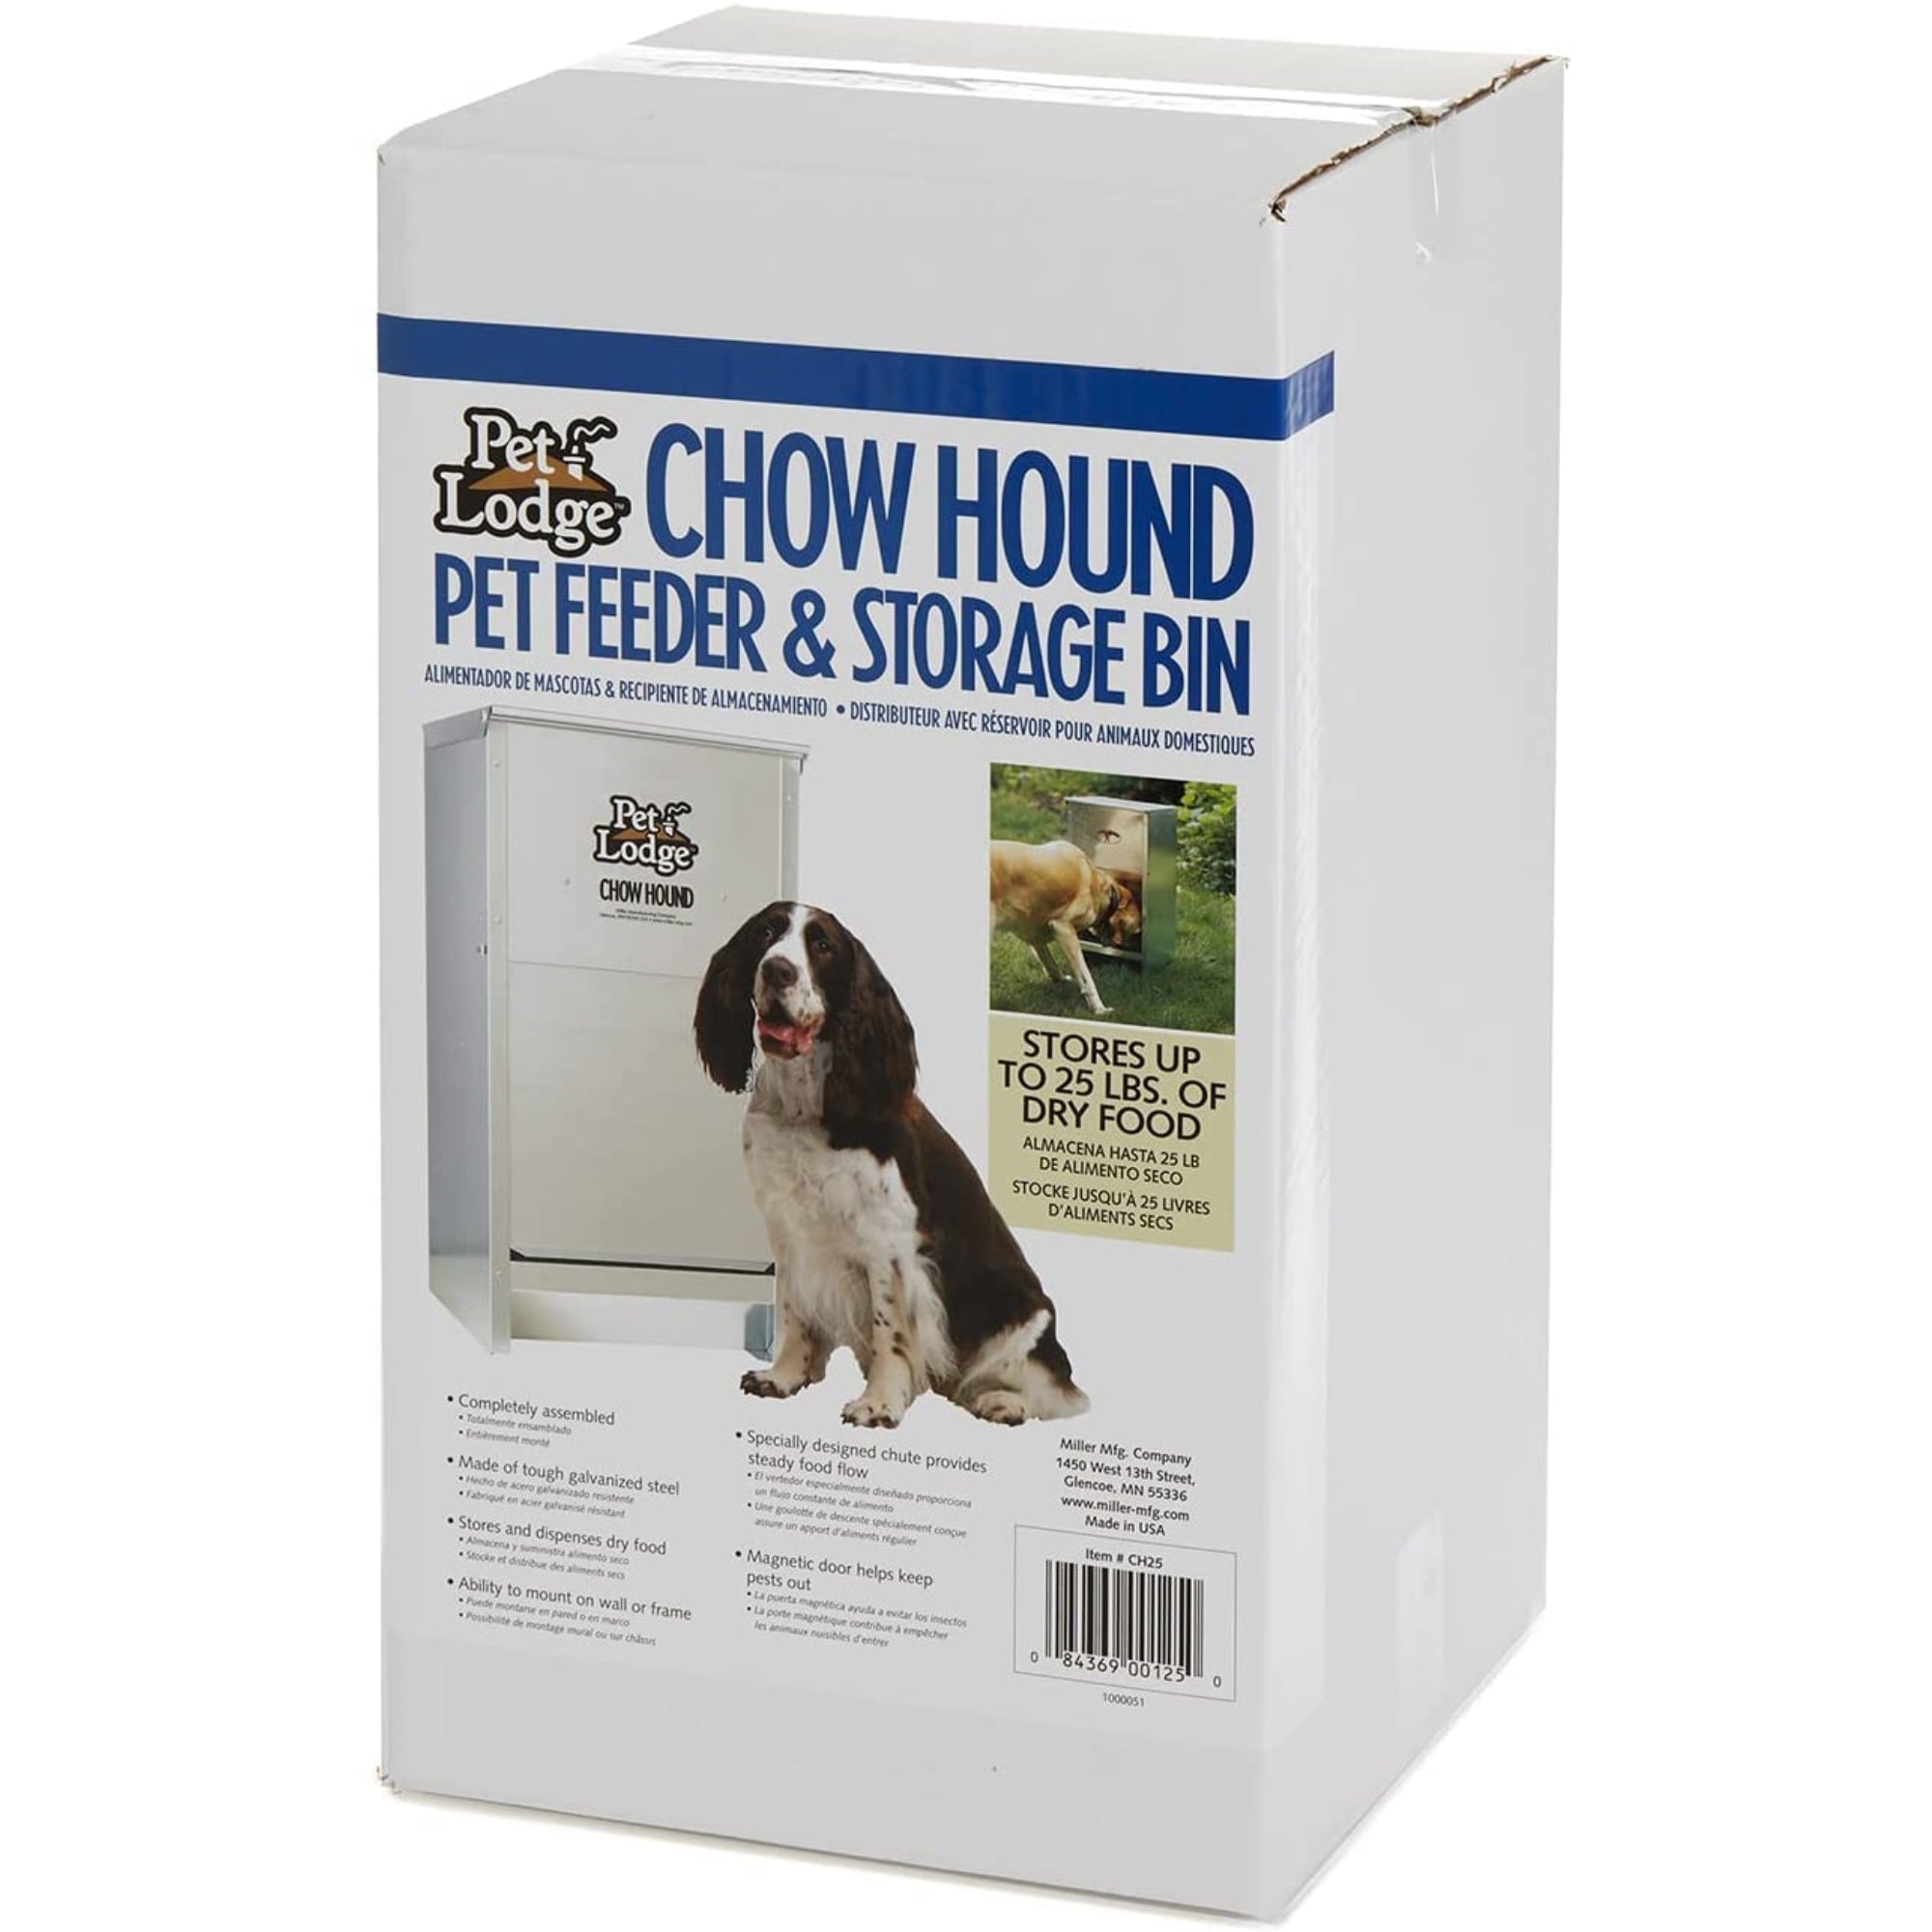 Miller Chow Hound Dog Pet Outdoor Steel Chew-Proof Feeder For Outside Dogs, Magnetic Lock, 25 Pound Capacity